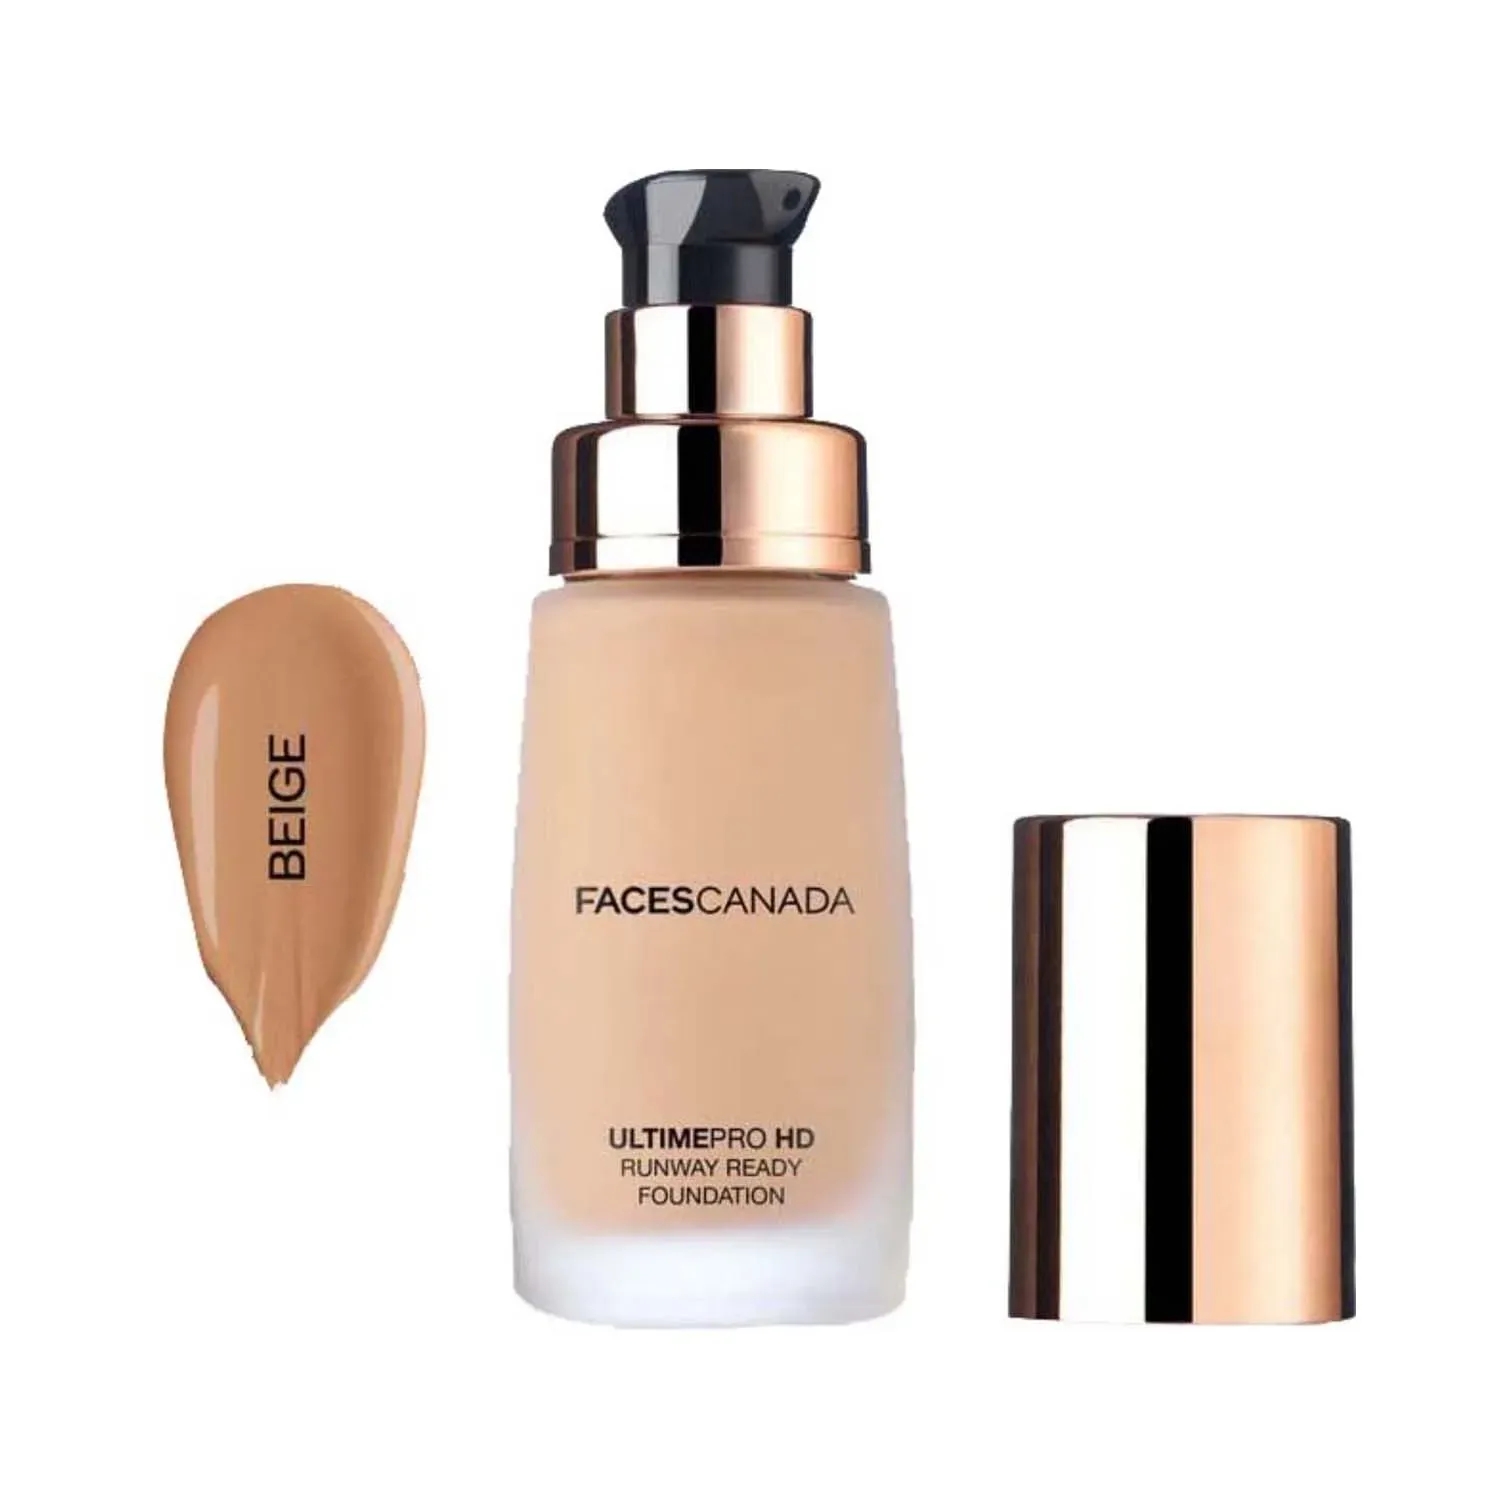 Faces Canada | Faces Canada Ultime Pro HD Runway Ready Foundation - 03 Beige (30ml)